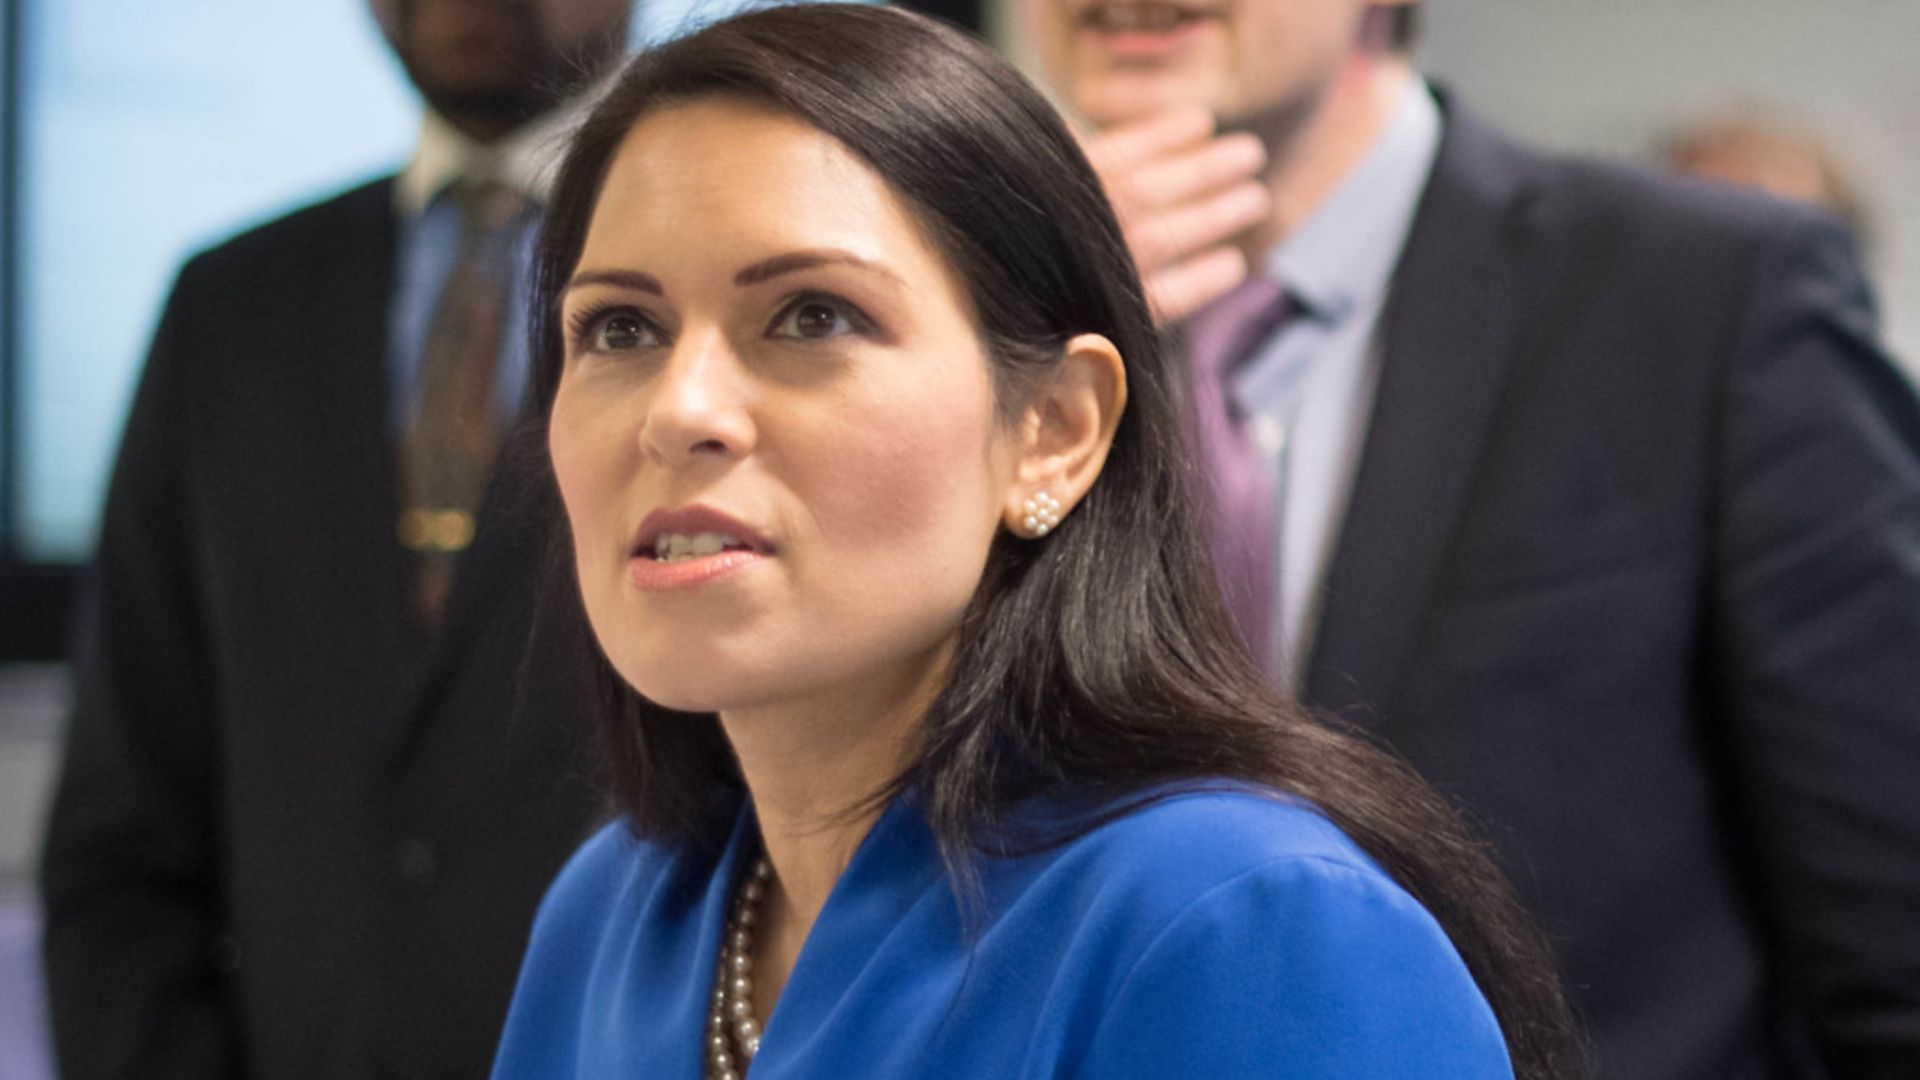 Home secretary Priti Patel asked staff to explore building an asylum seeker processing centre on Ascension Island - Credit: Stefan Rousseau/PA Wire.